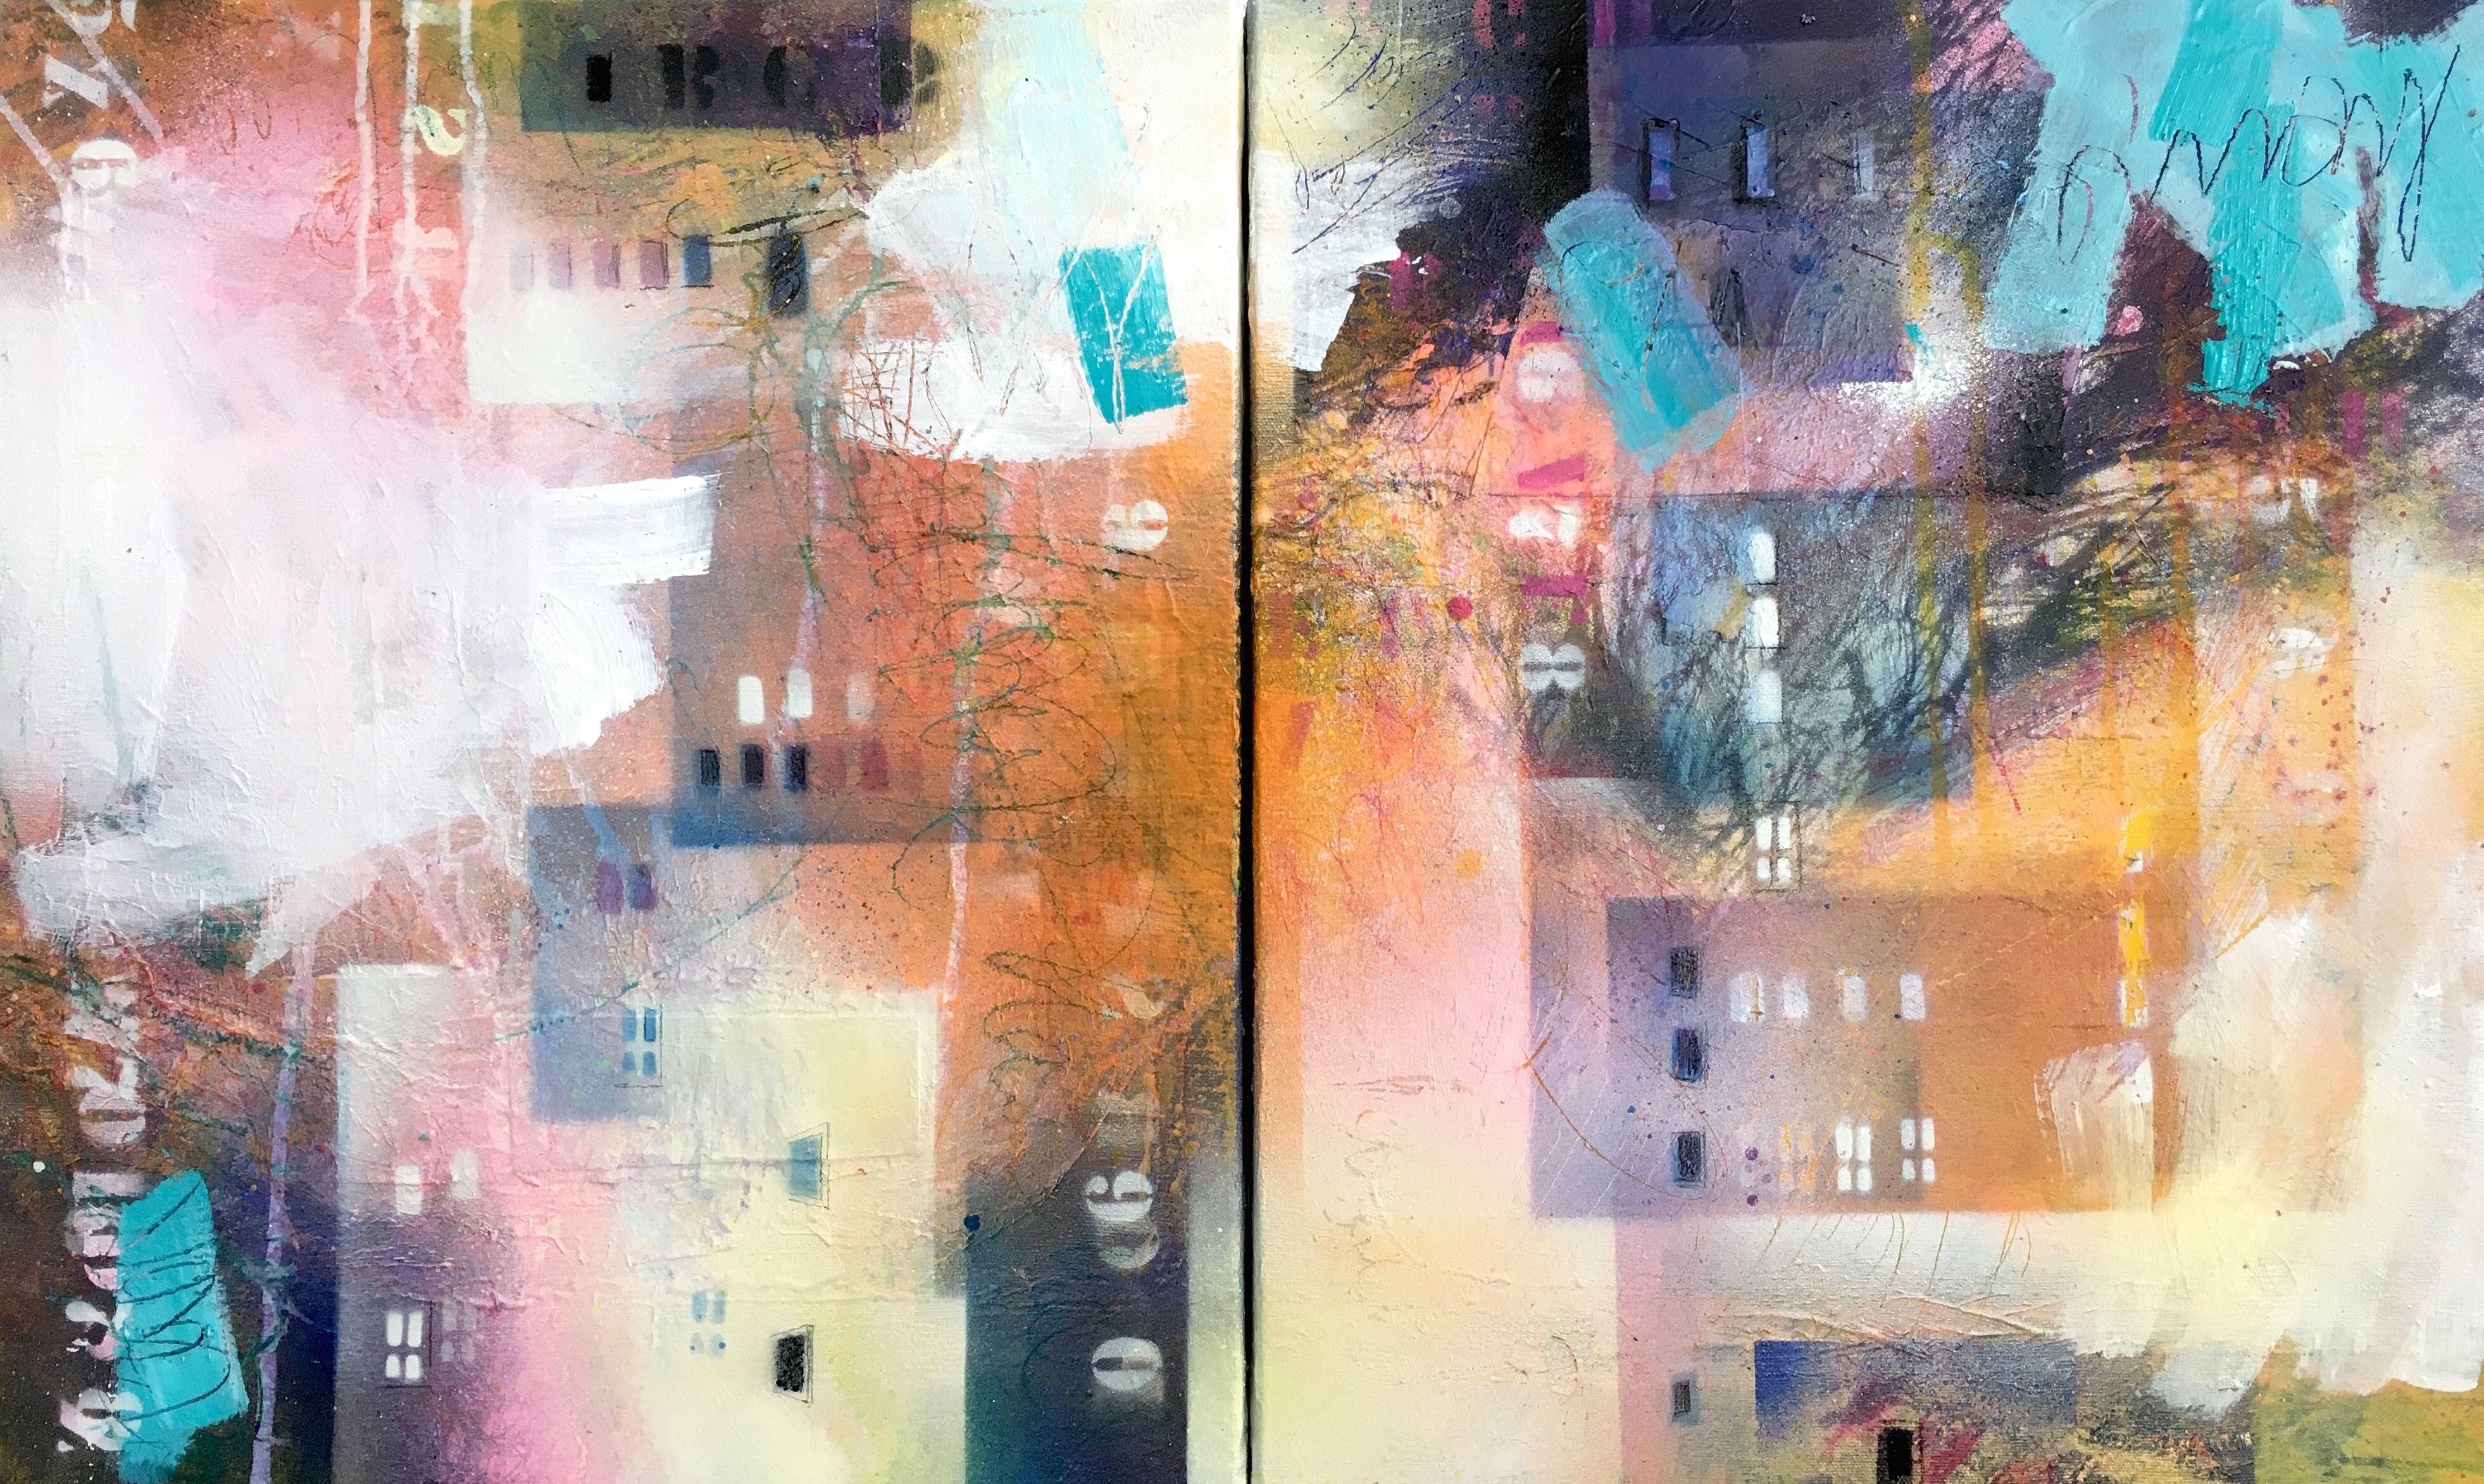 home IV/V (diptychon), Mixed Media on Canvas